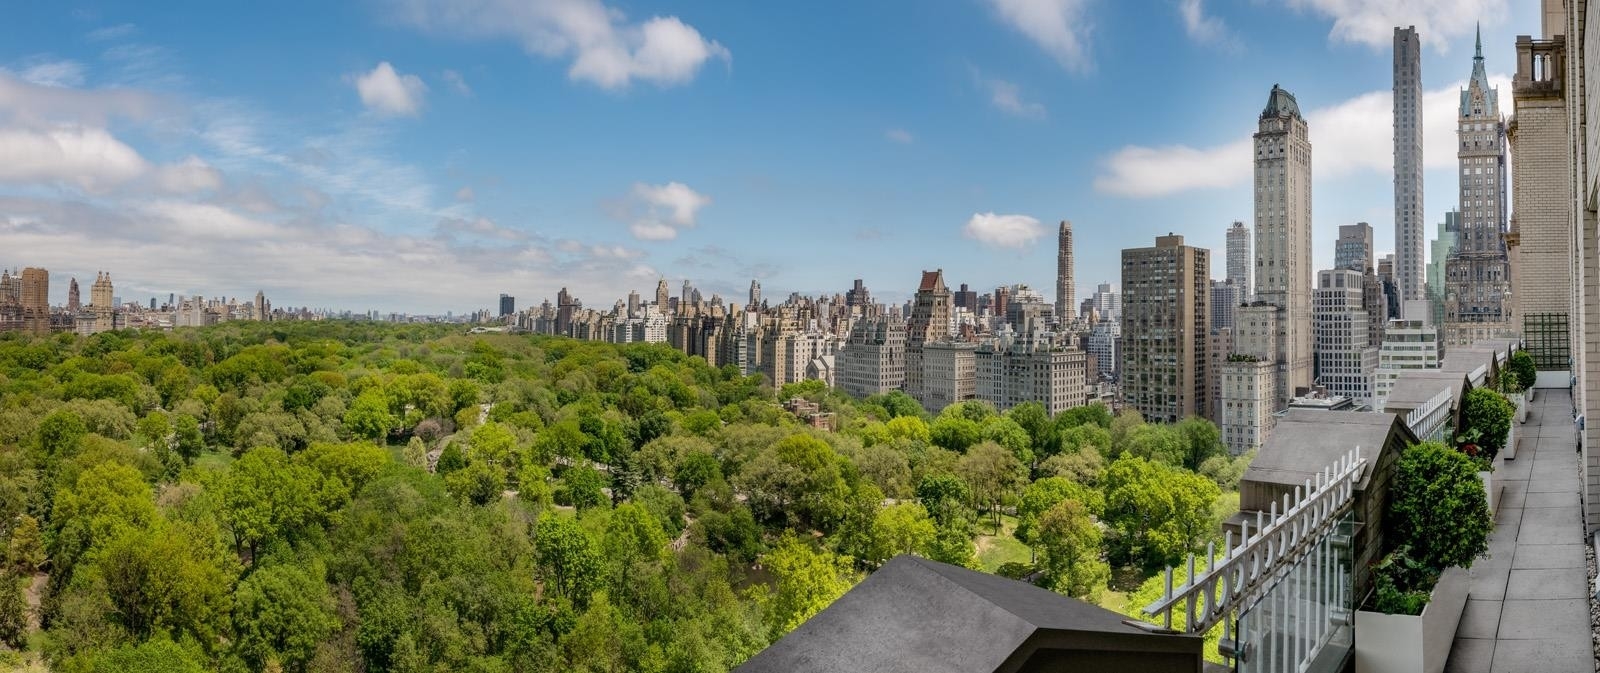 8. Condominiums for Sale at Residences At Ritz-Carlton, 50 CENTRAL PARK S, PH23 Central Park South, New York, NY 10019